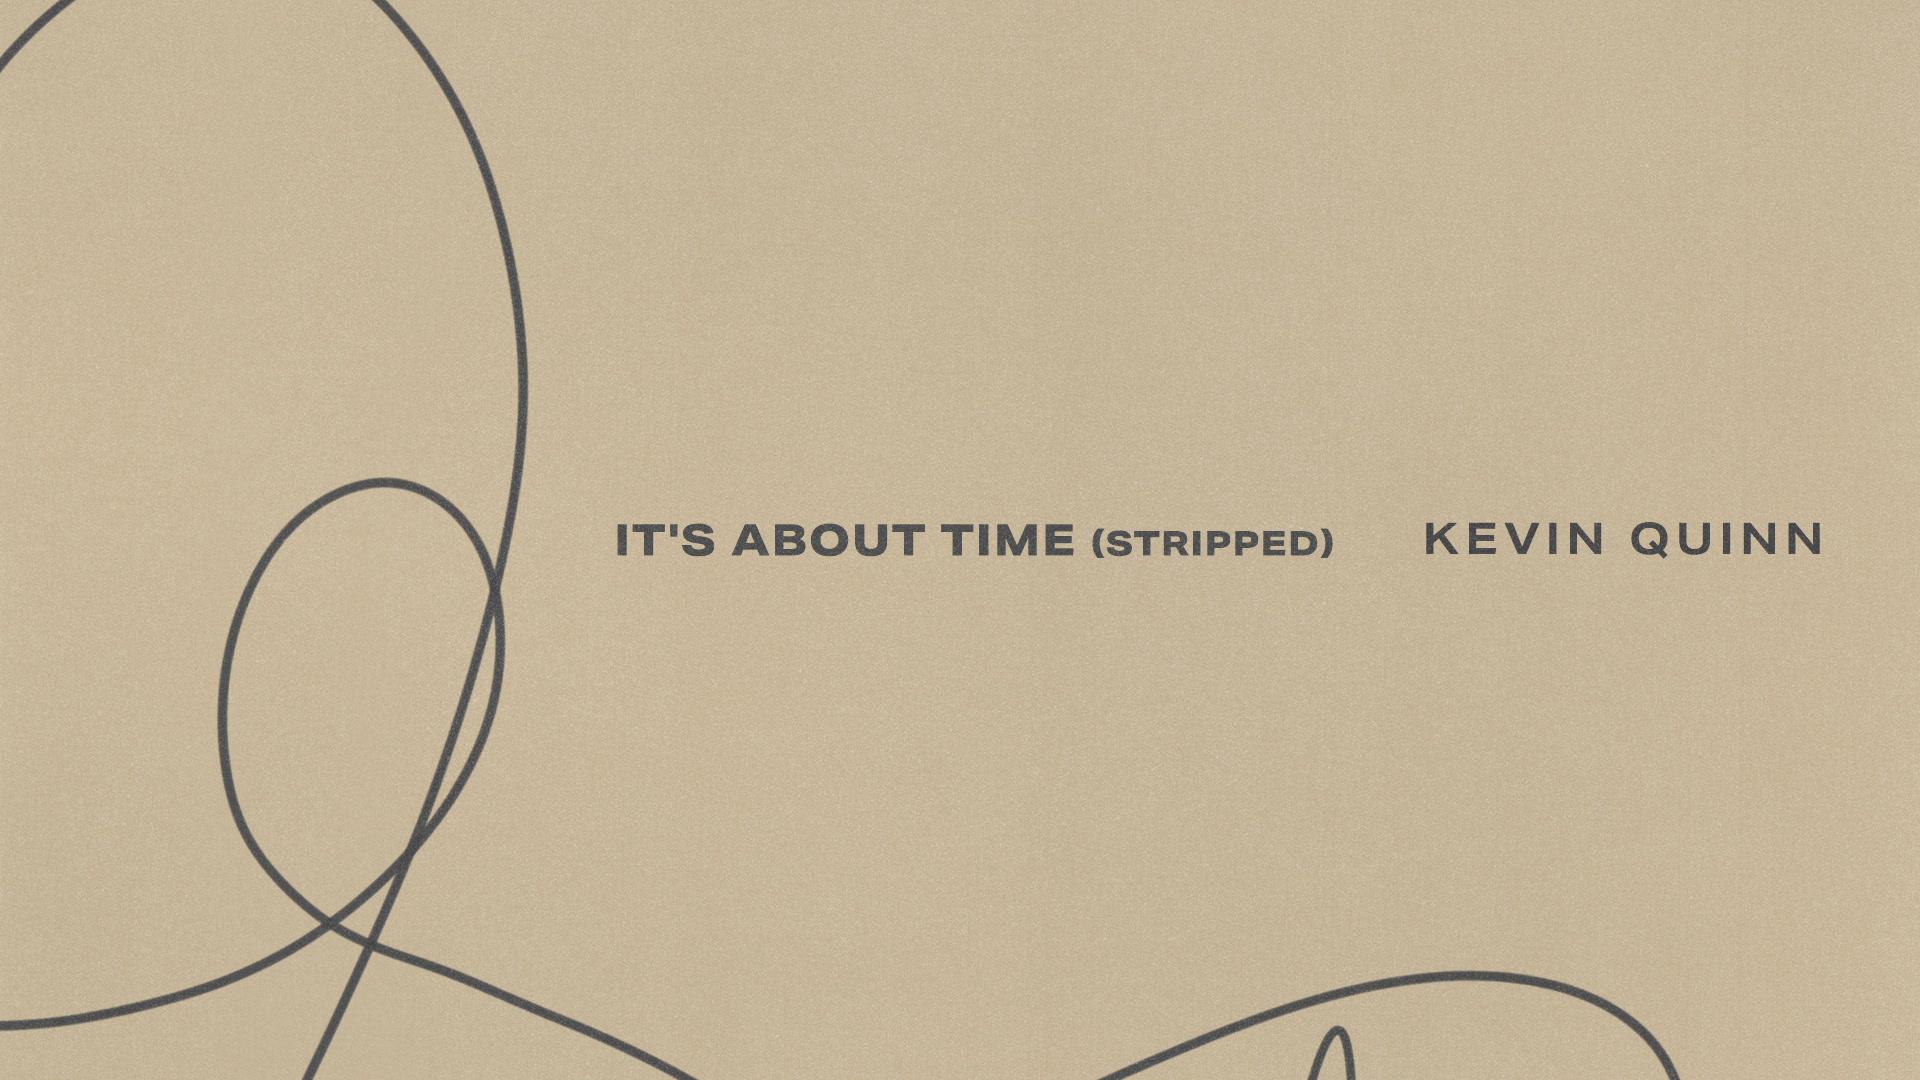 Kevin Quinn - It's About Time (Stripped/Audio)